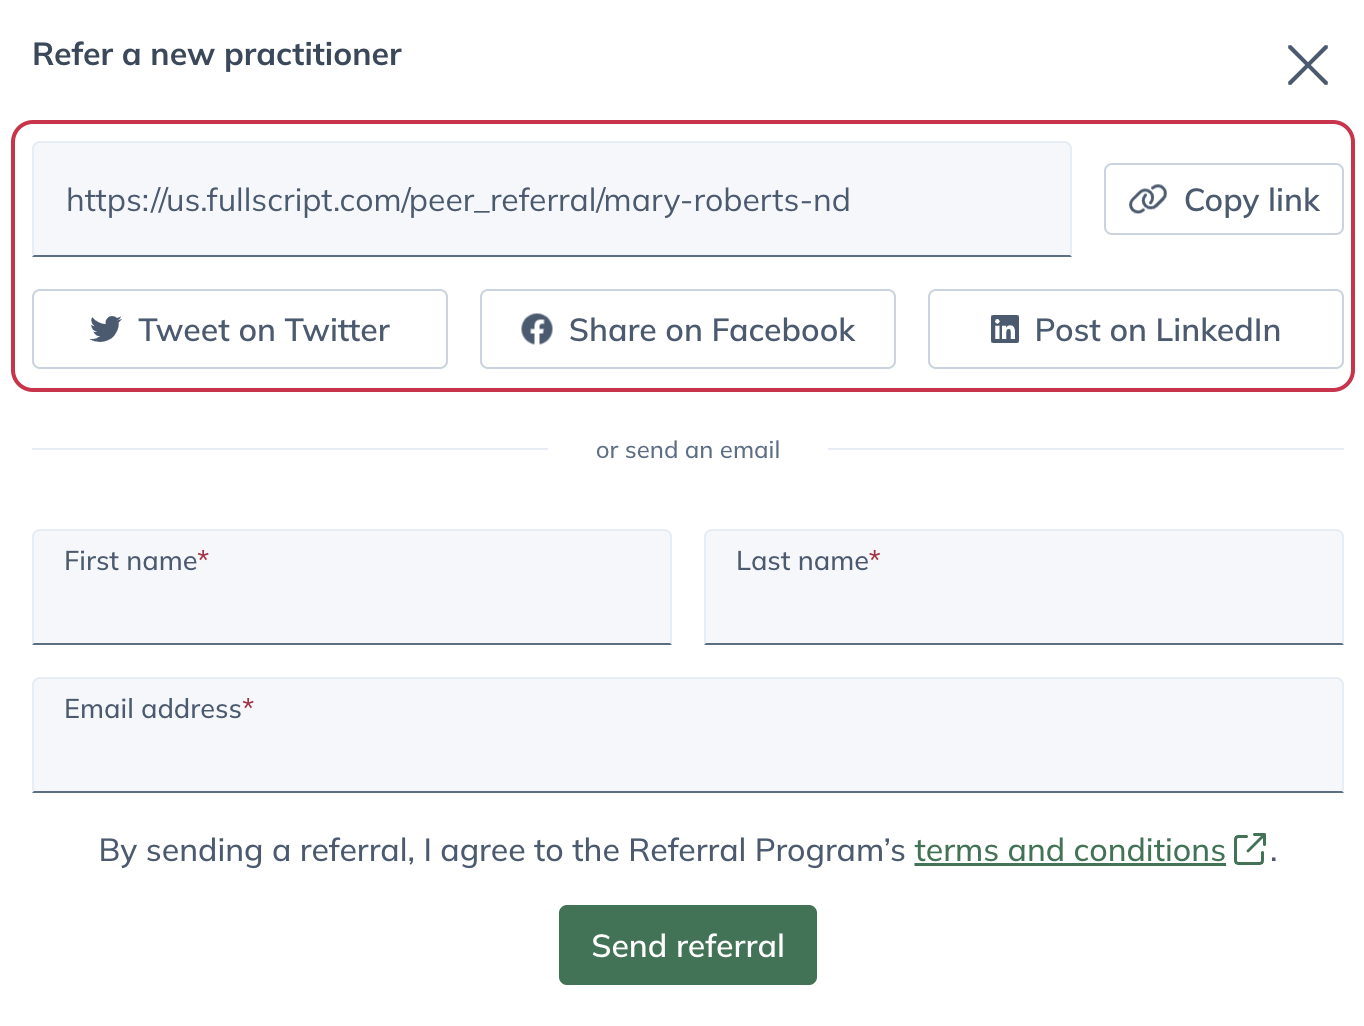 A dispensary's referral link and social sharing options to refer your network
  to Fullscript.